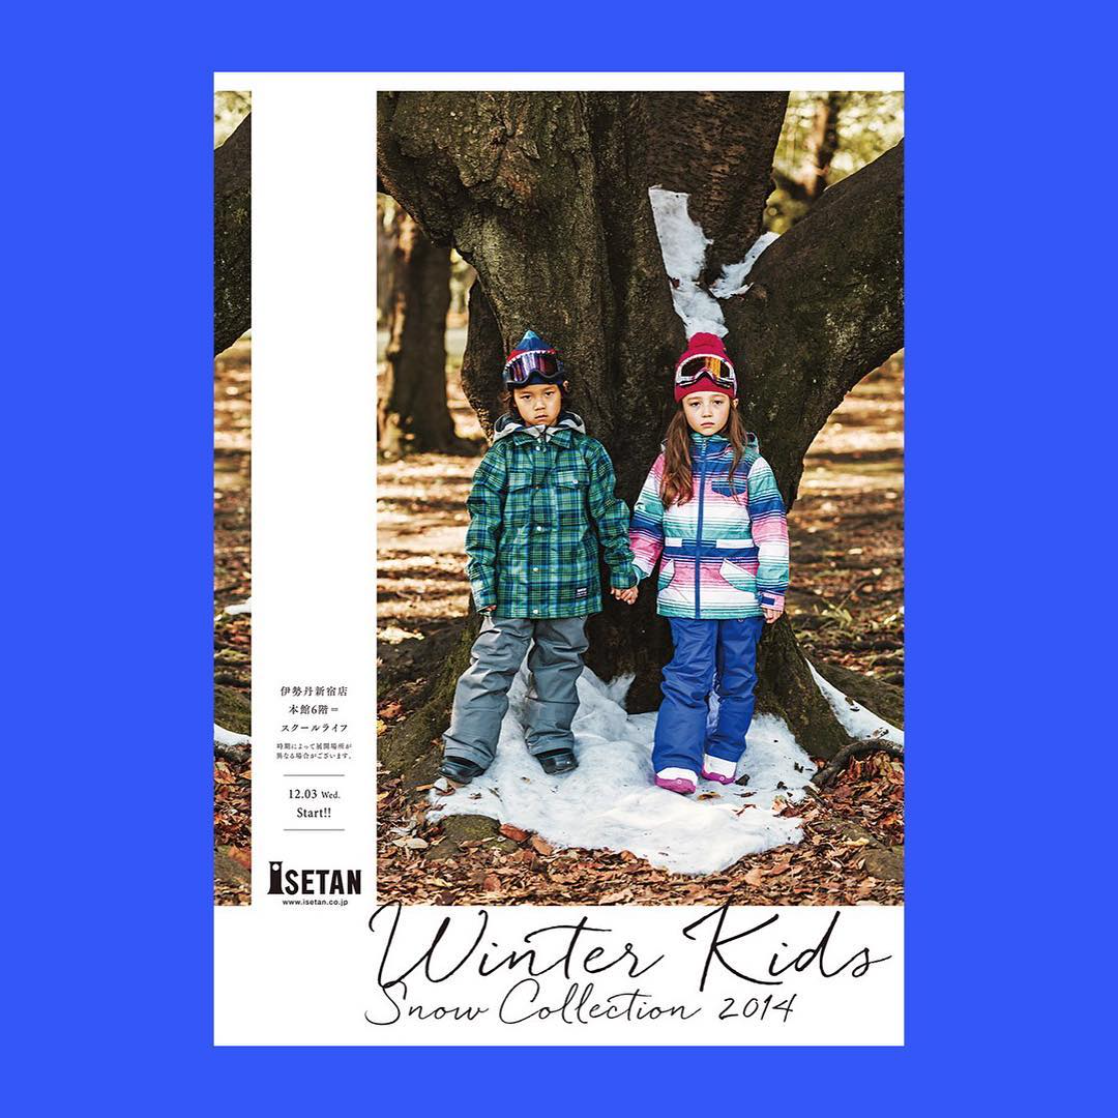 Winter Kids Snow Collection 2014